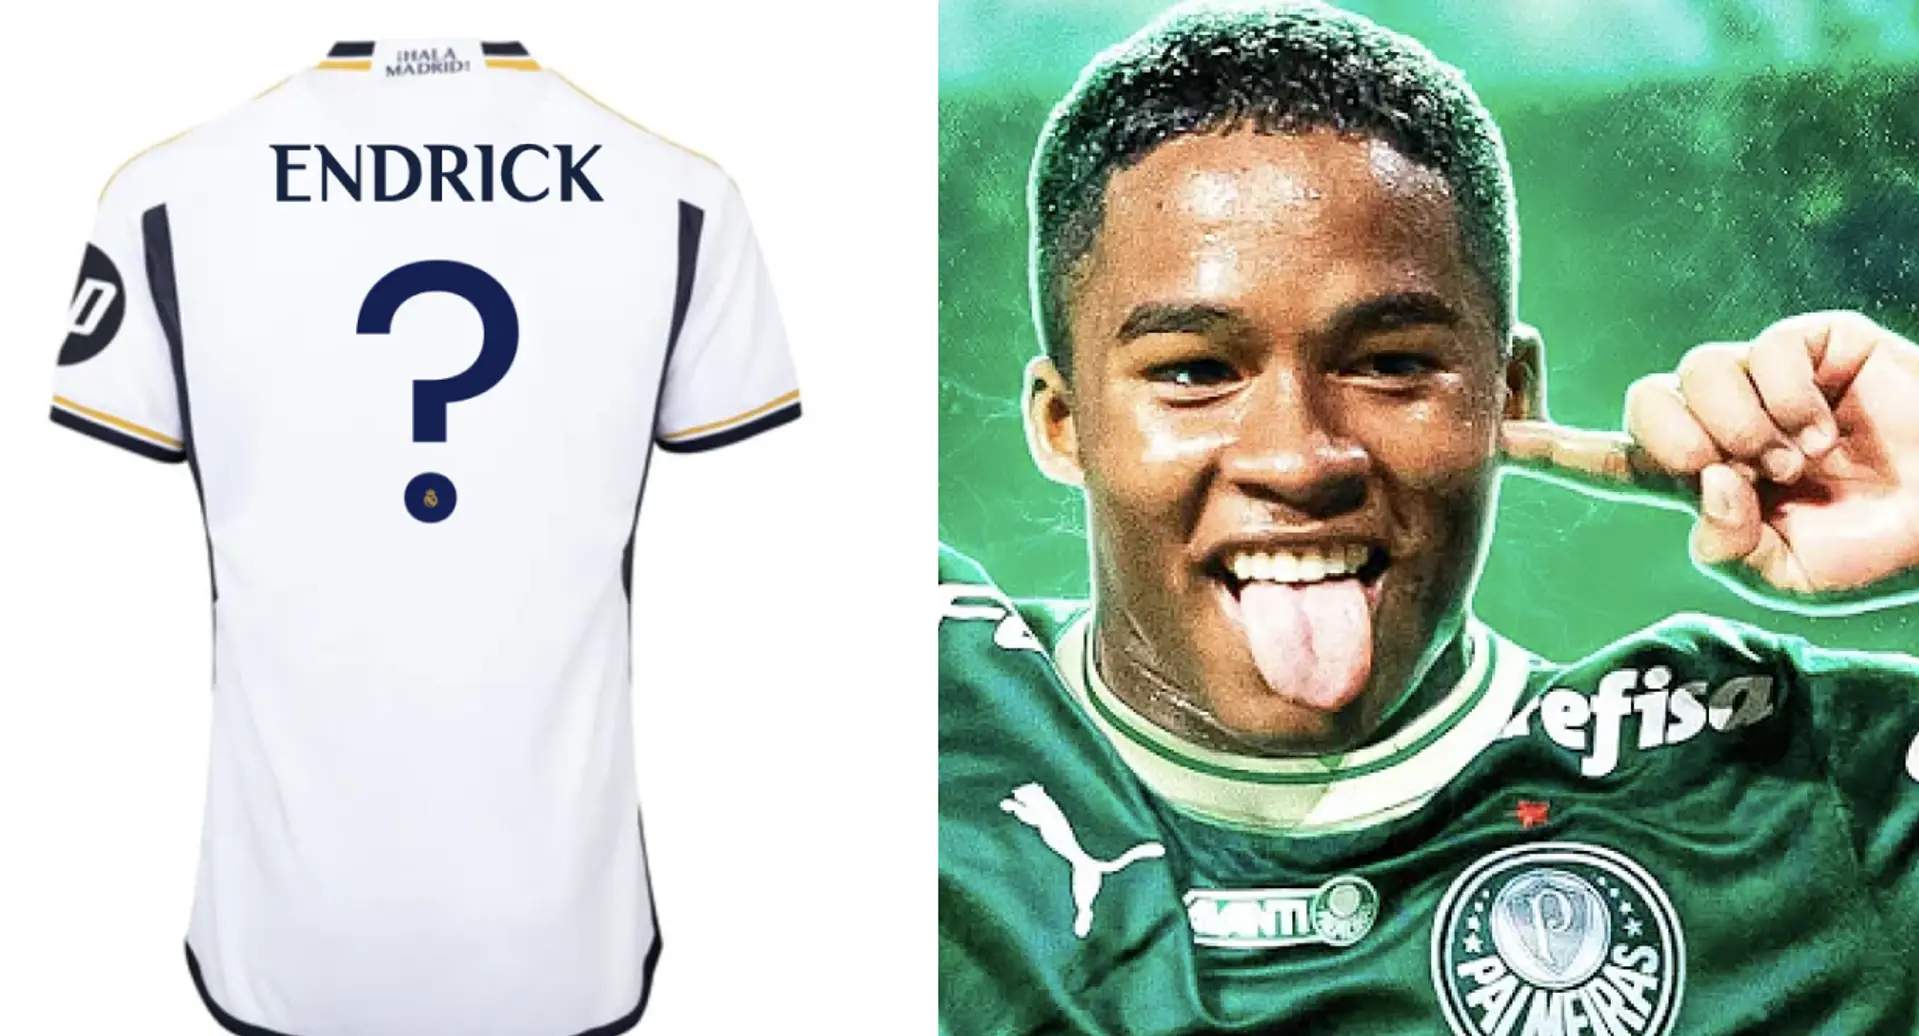 Endrick hints at jersey he wants to wear at Real Madrid and it's NOT no. 9 